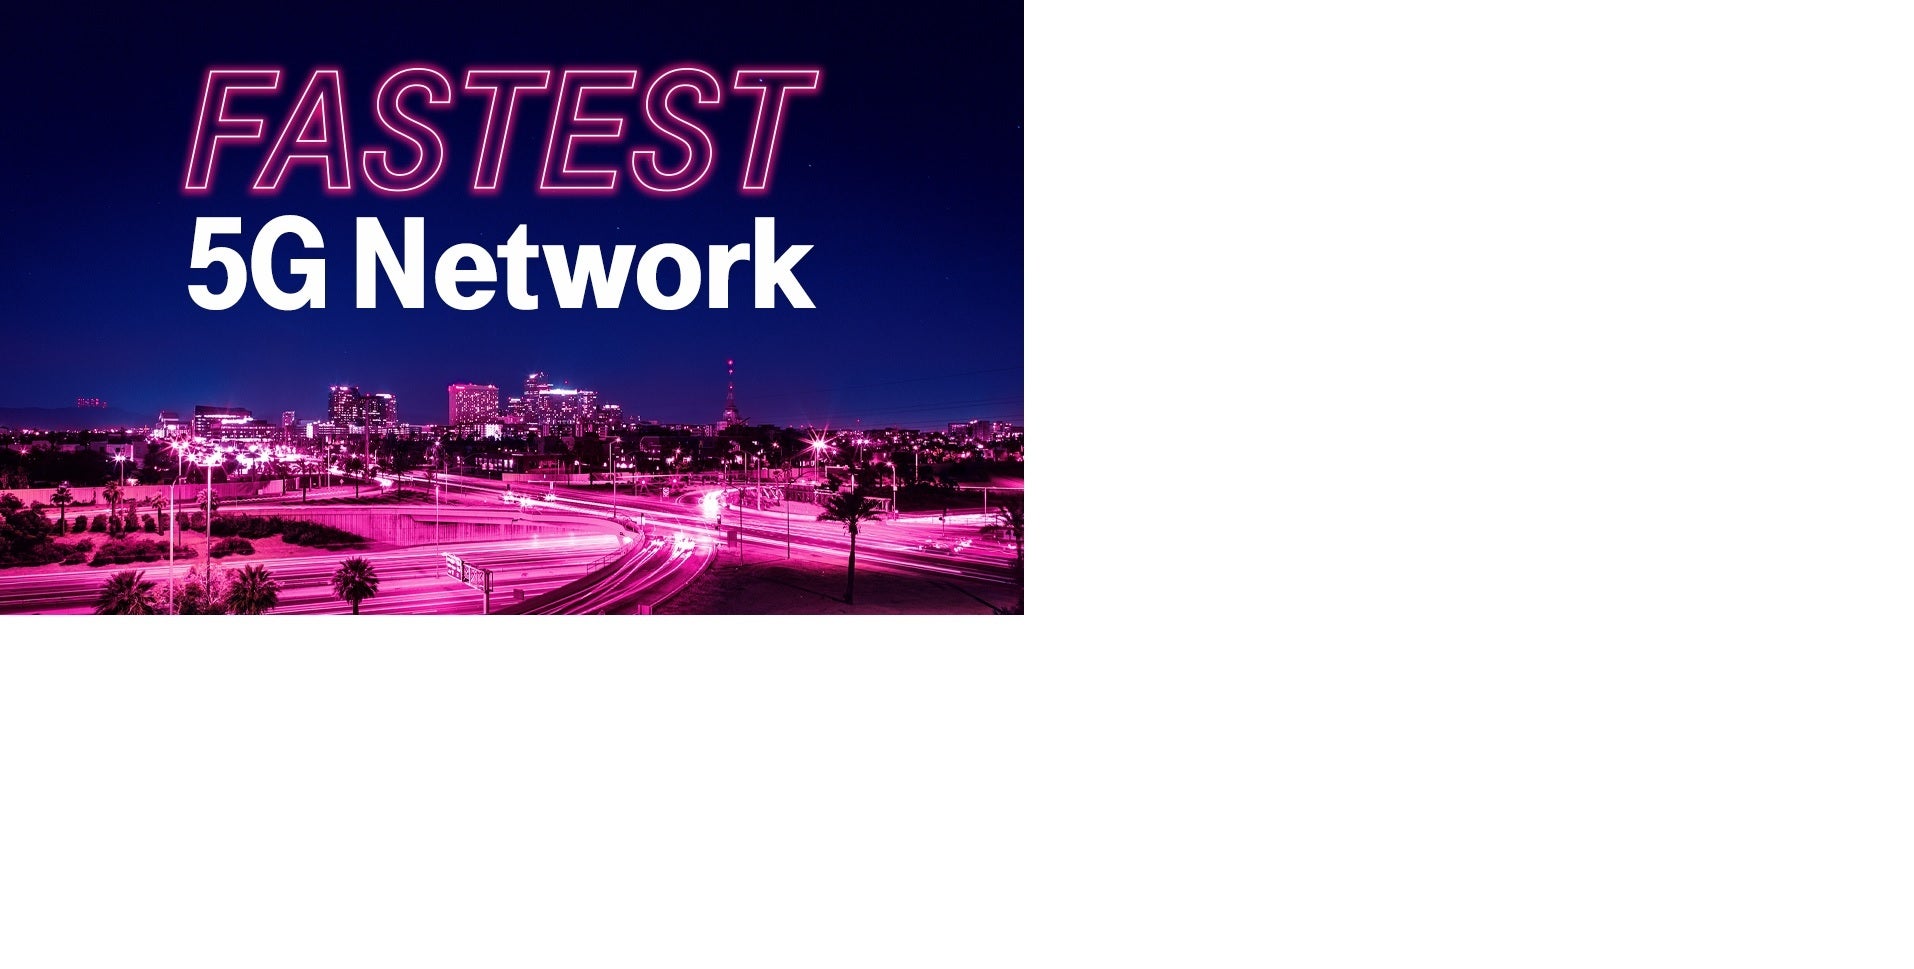 All U.S. carriers make claims about their 5G networks based on third-party data - T-Mobile not allowed to say that it is &quot;the most reliable 5G network&quot;